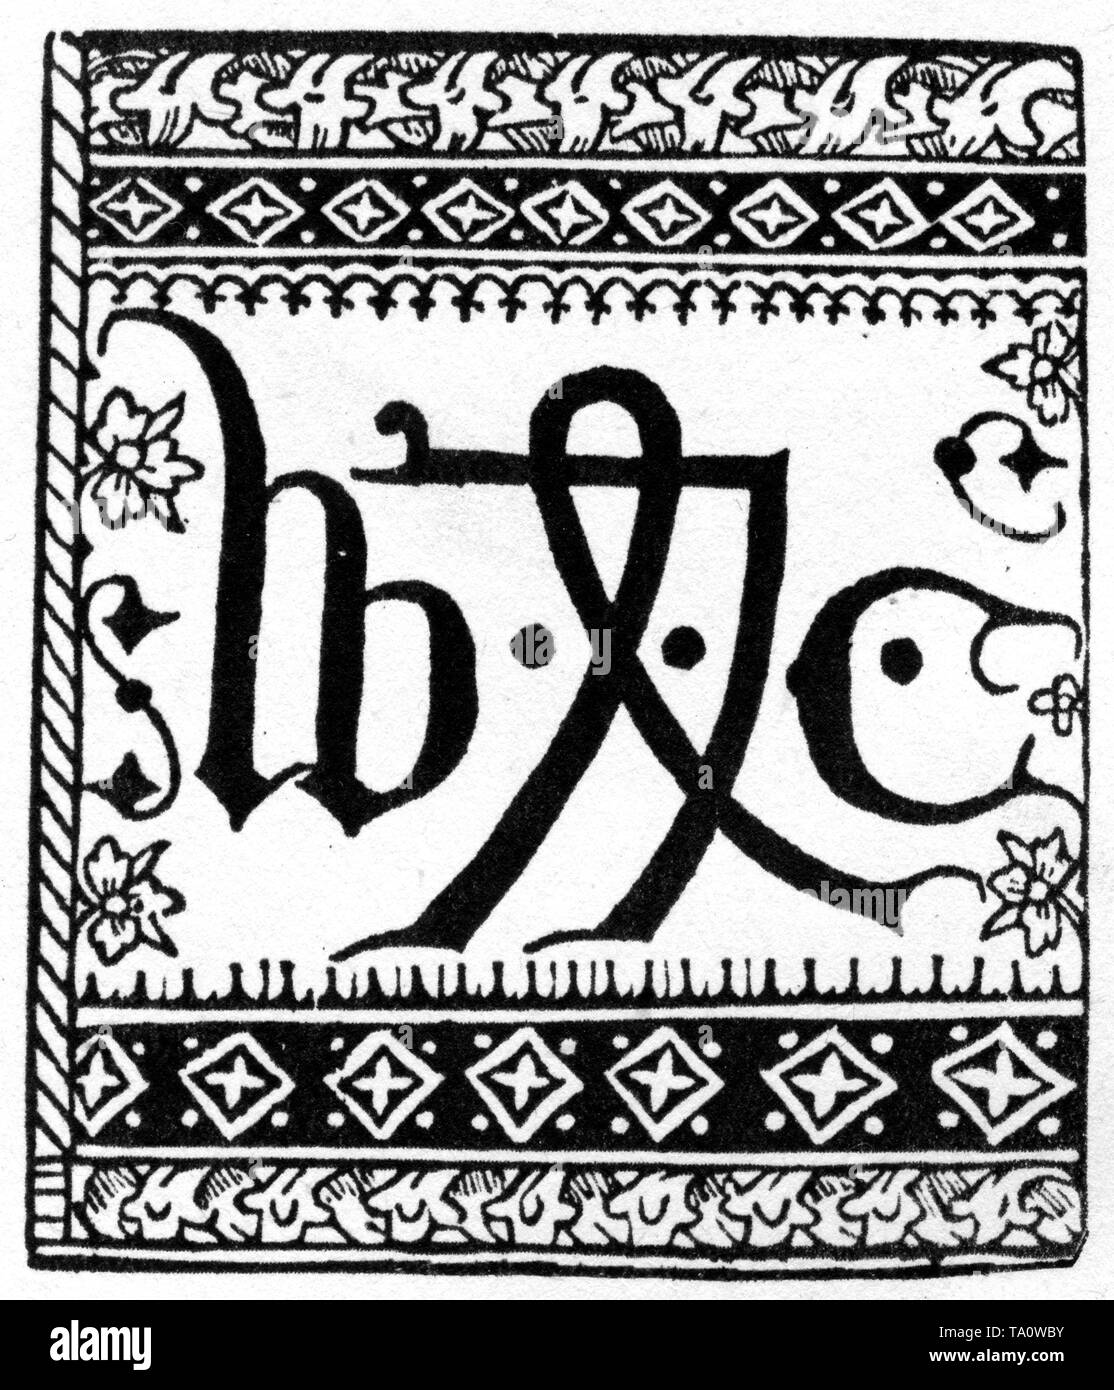 Caxton's printer's mark or device, 1478. By William Caxton (c1415-1422-c1492). Caxton was an English merchant, diplomat, writer and printer. Caxton is thought to be the first English person to work as a printer and the first to introduce a printing press into England. Stock Photo